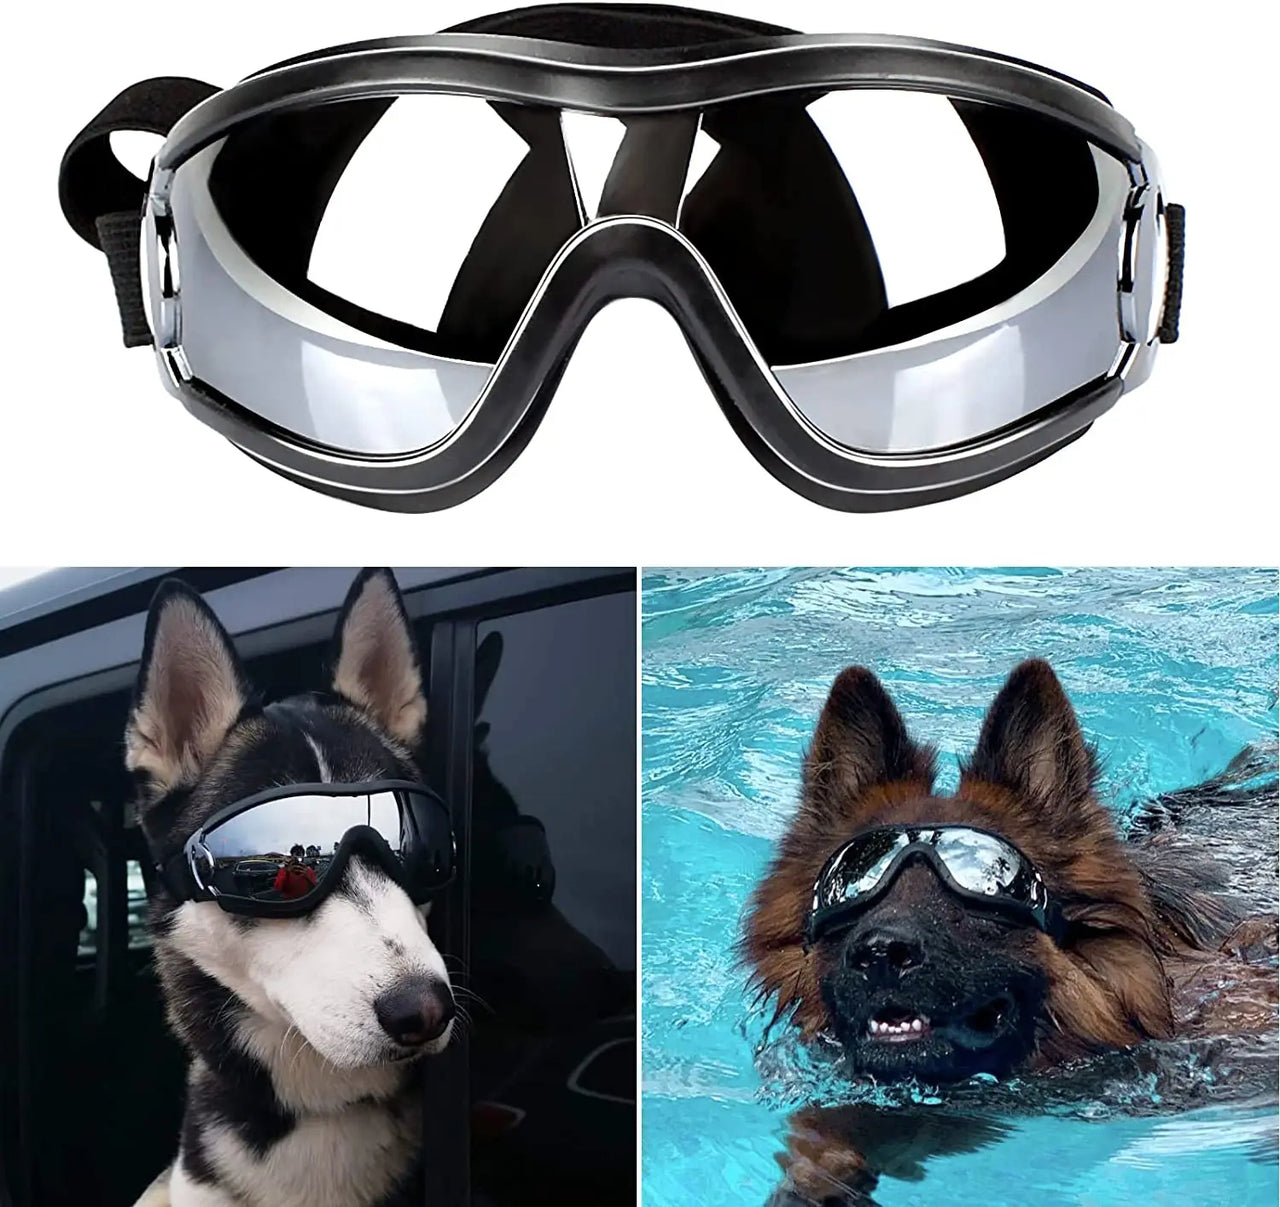 2PCS Protective Goggles for Dogs and Cats - Sunglasses - UV Protection - Cool Glasses for Small Dogs - Outdoor Riding 138